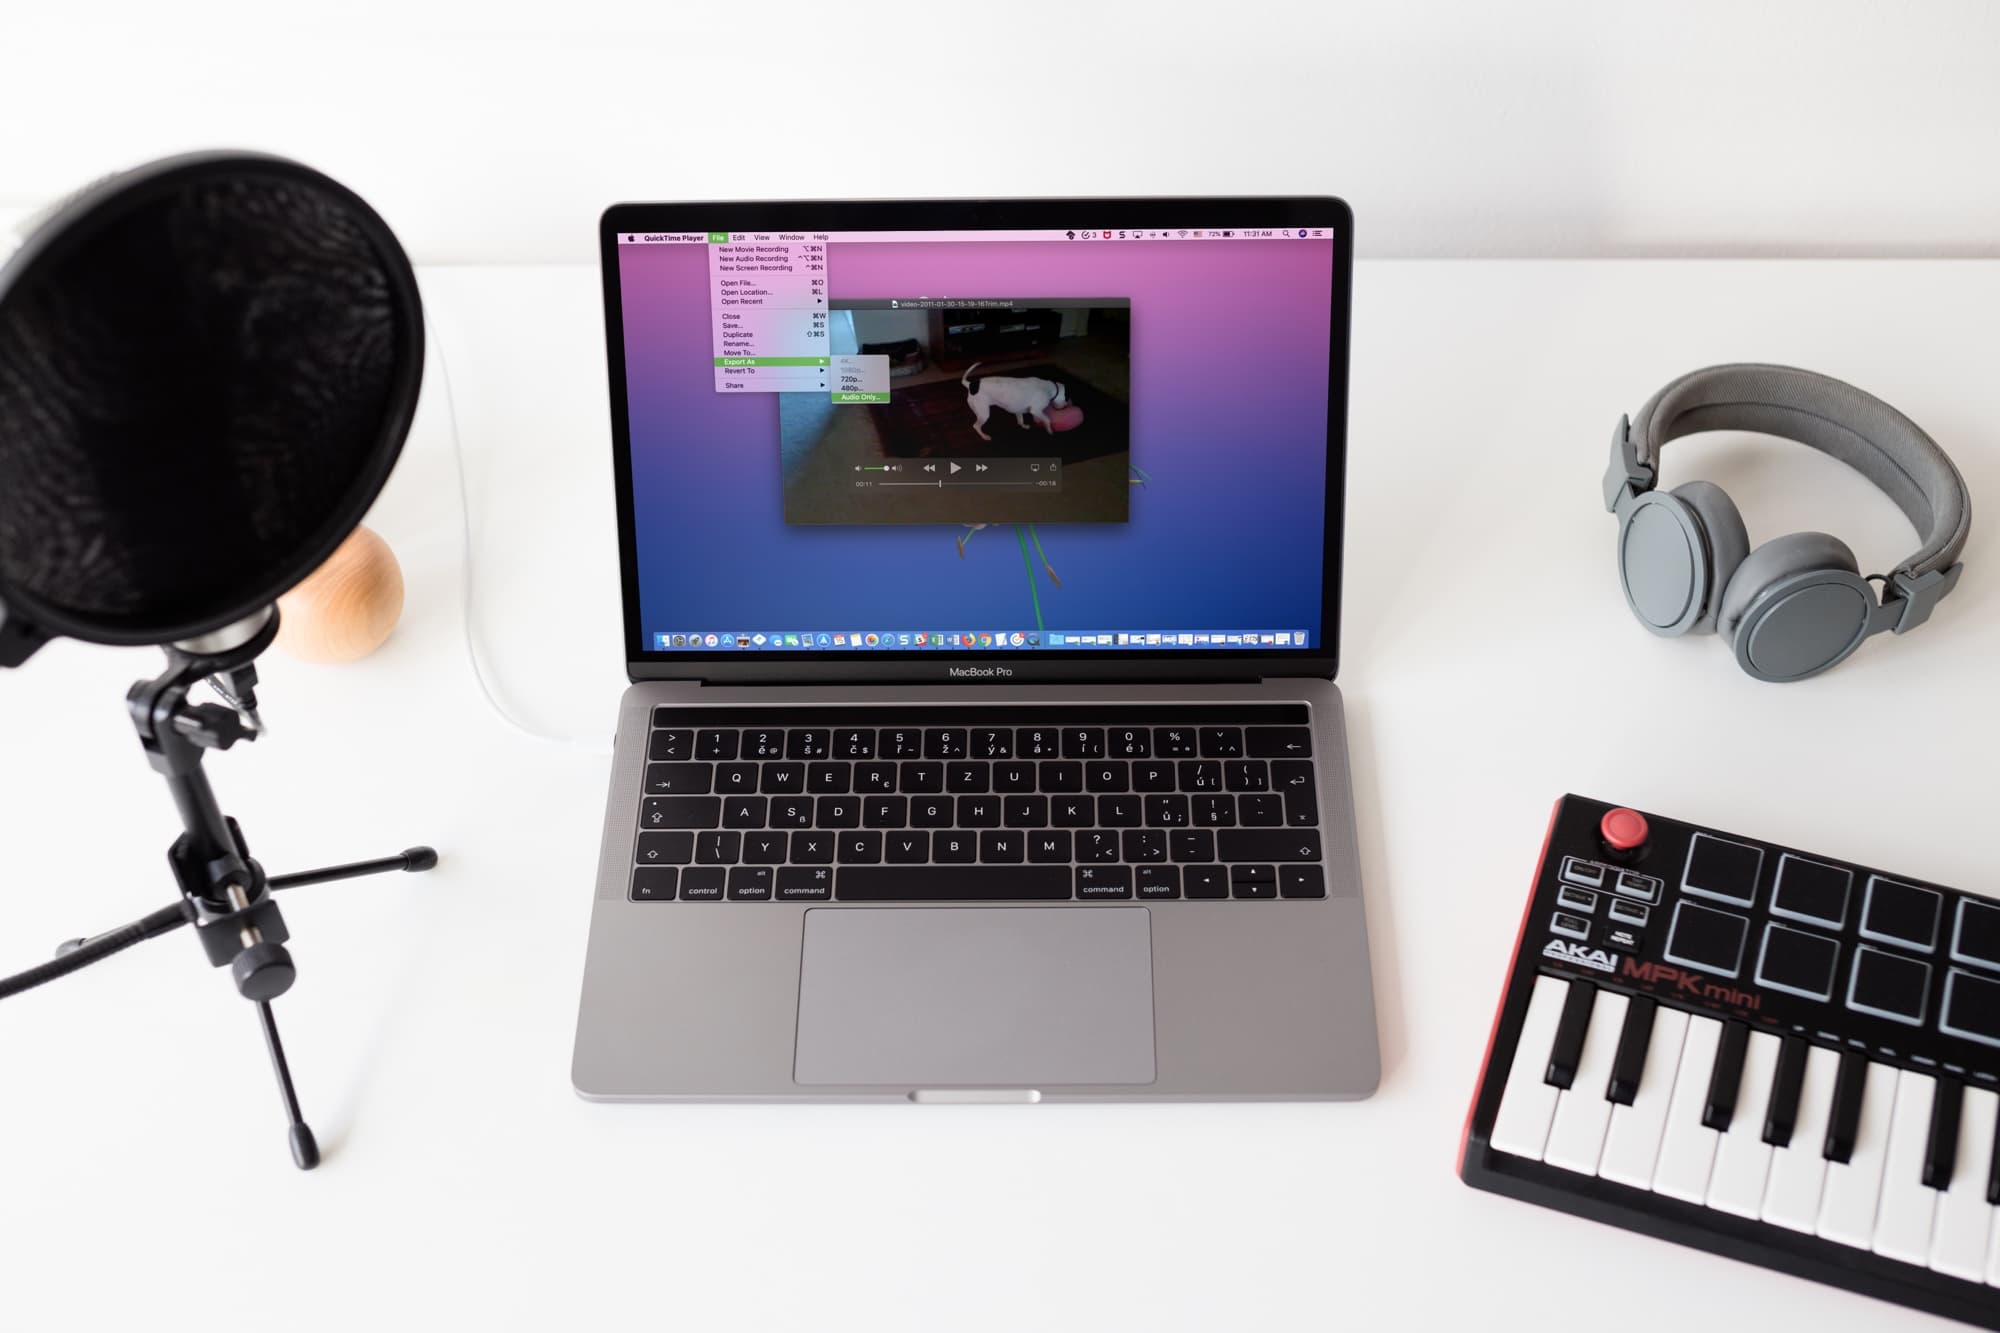 Extract Audio from Video on MacBook with QuickTime